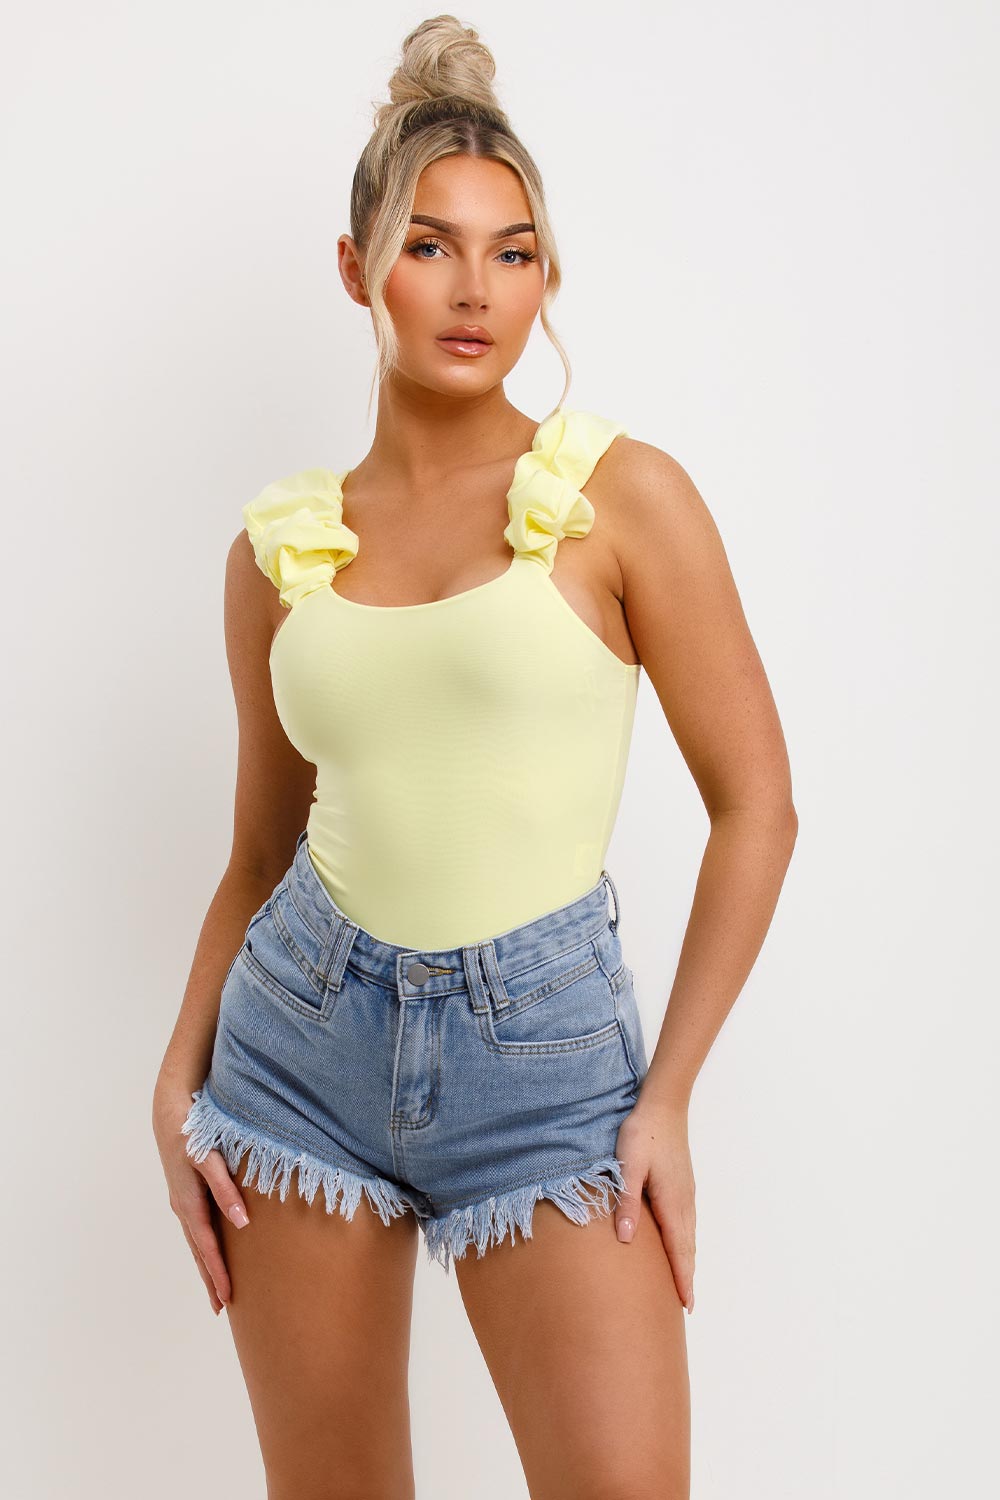 ruffle ruched strap double lined bodysuit top going out outfit